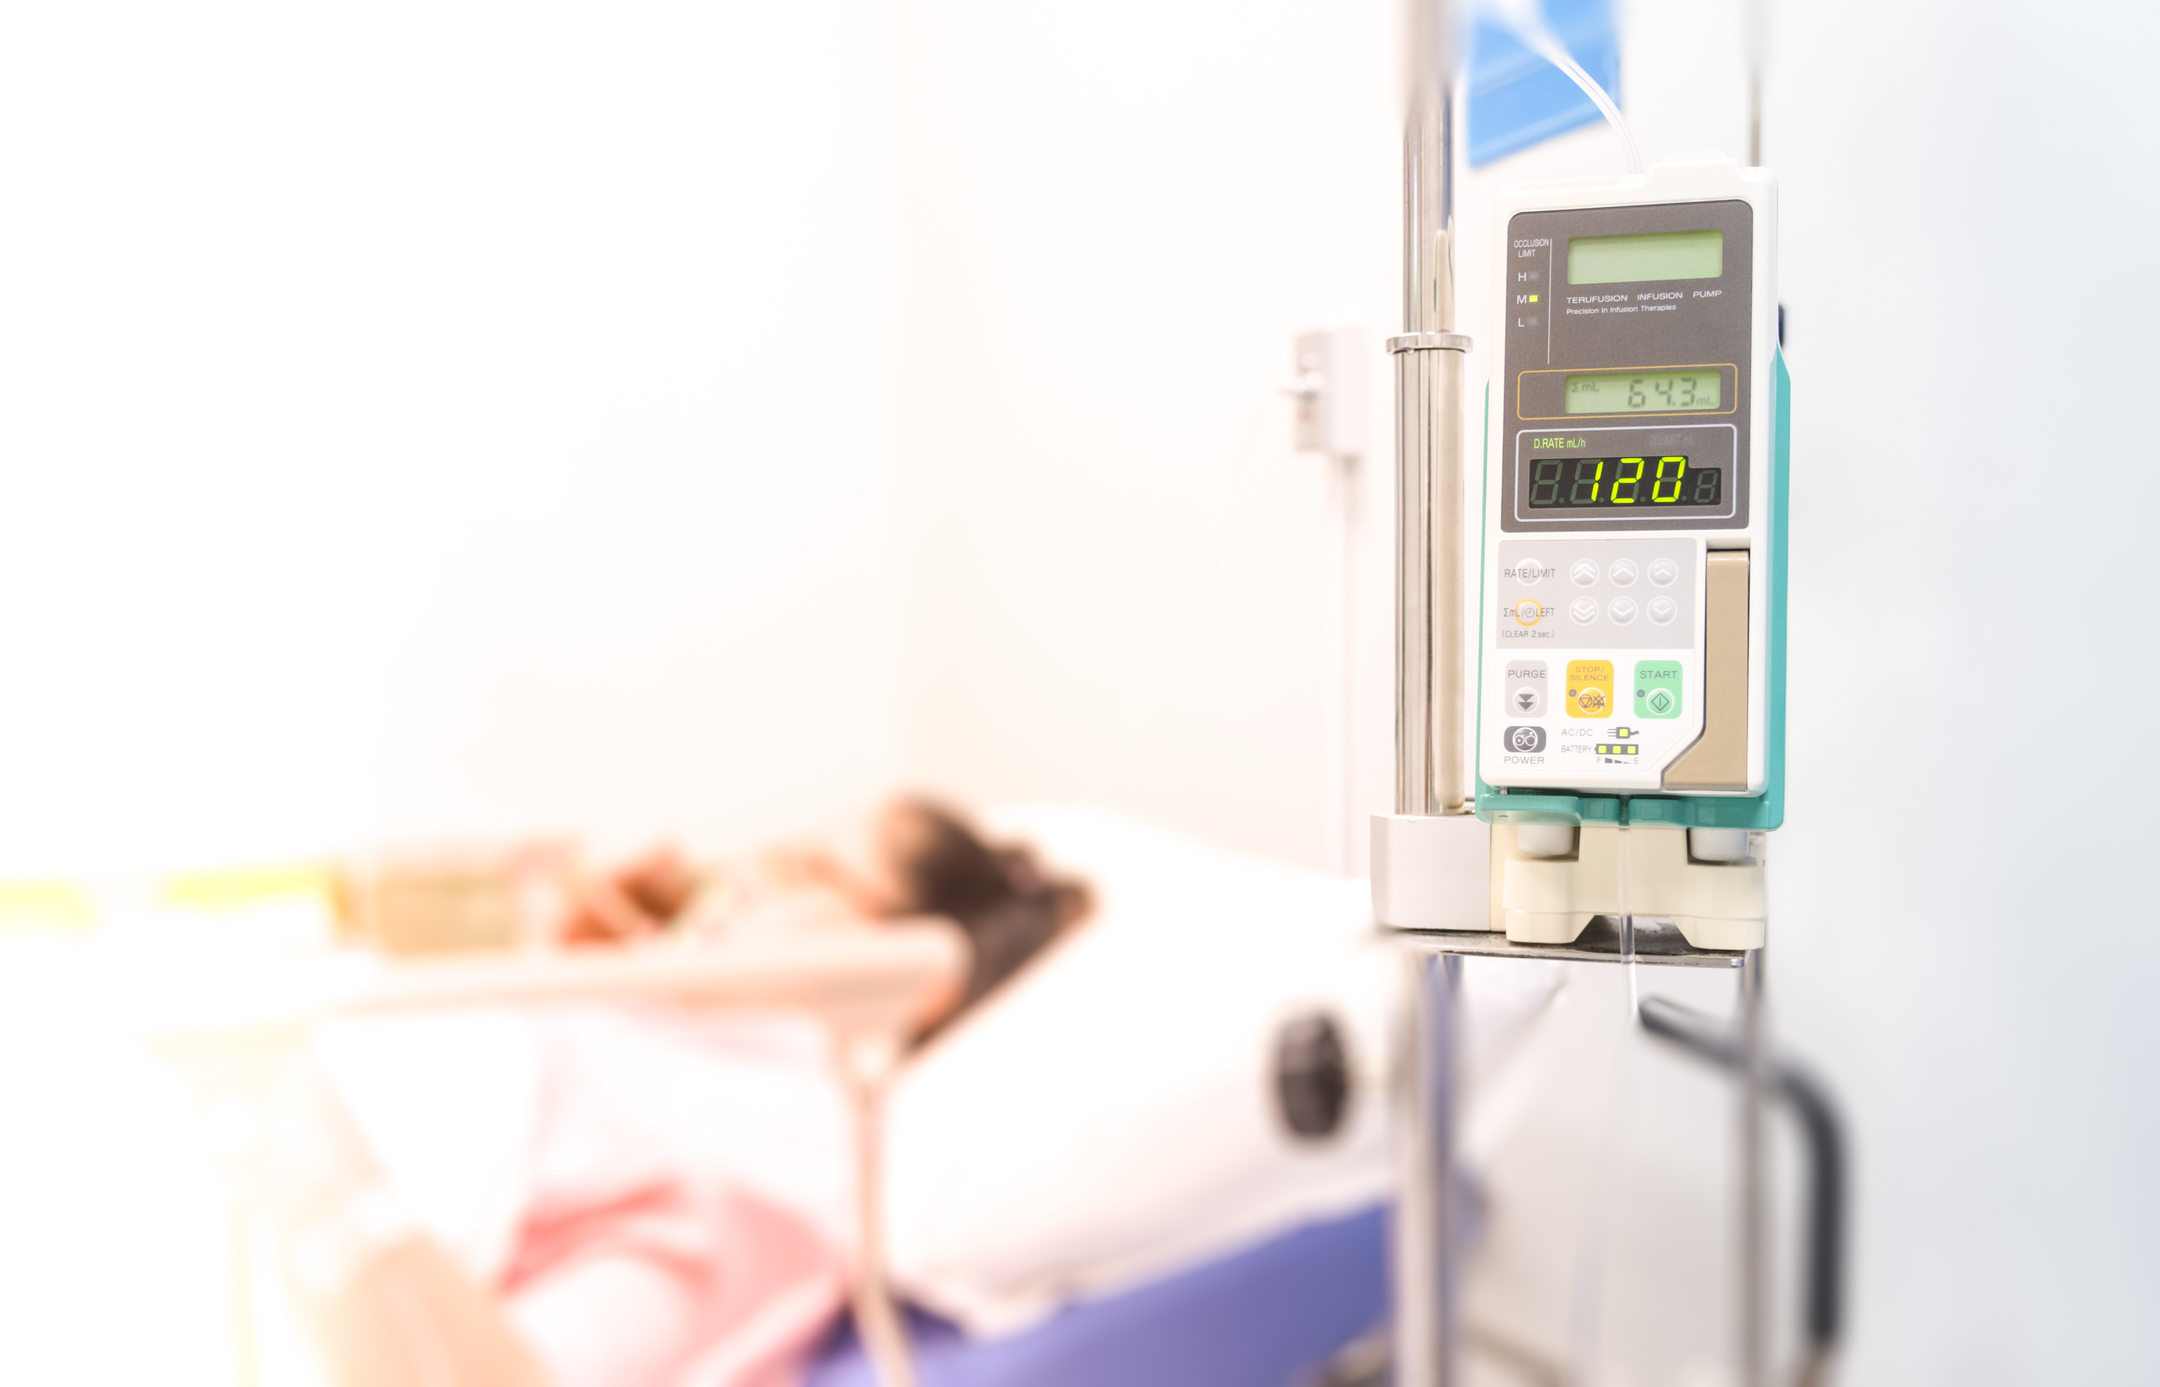  Many drug infusion pumps are vulnerable to cyber attacks. 